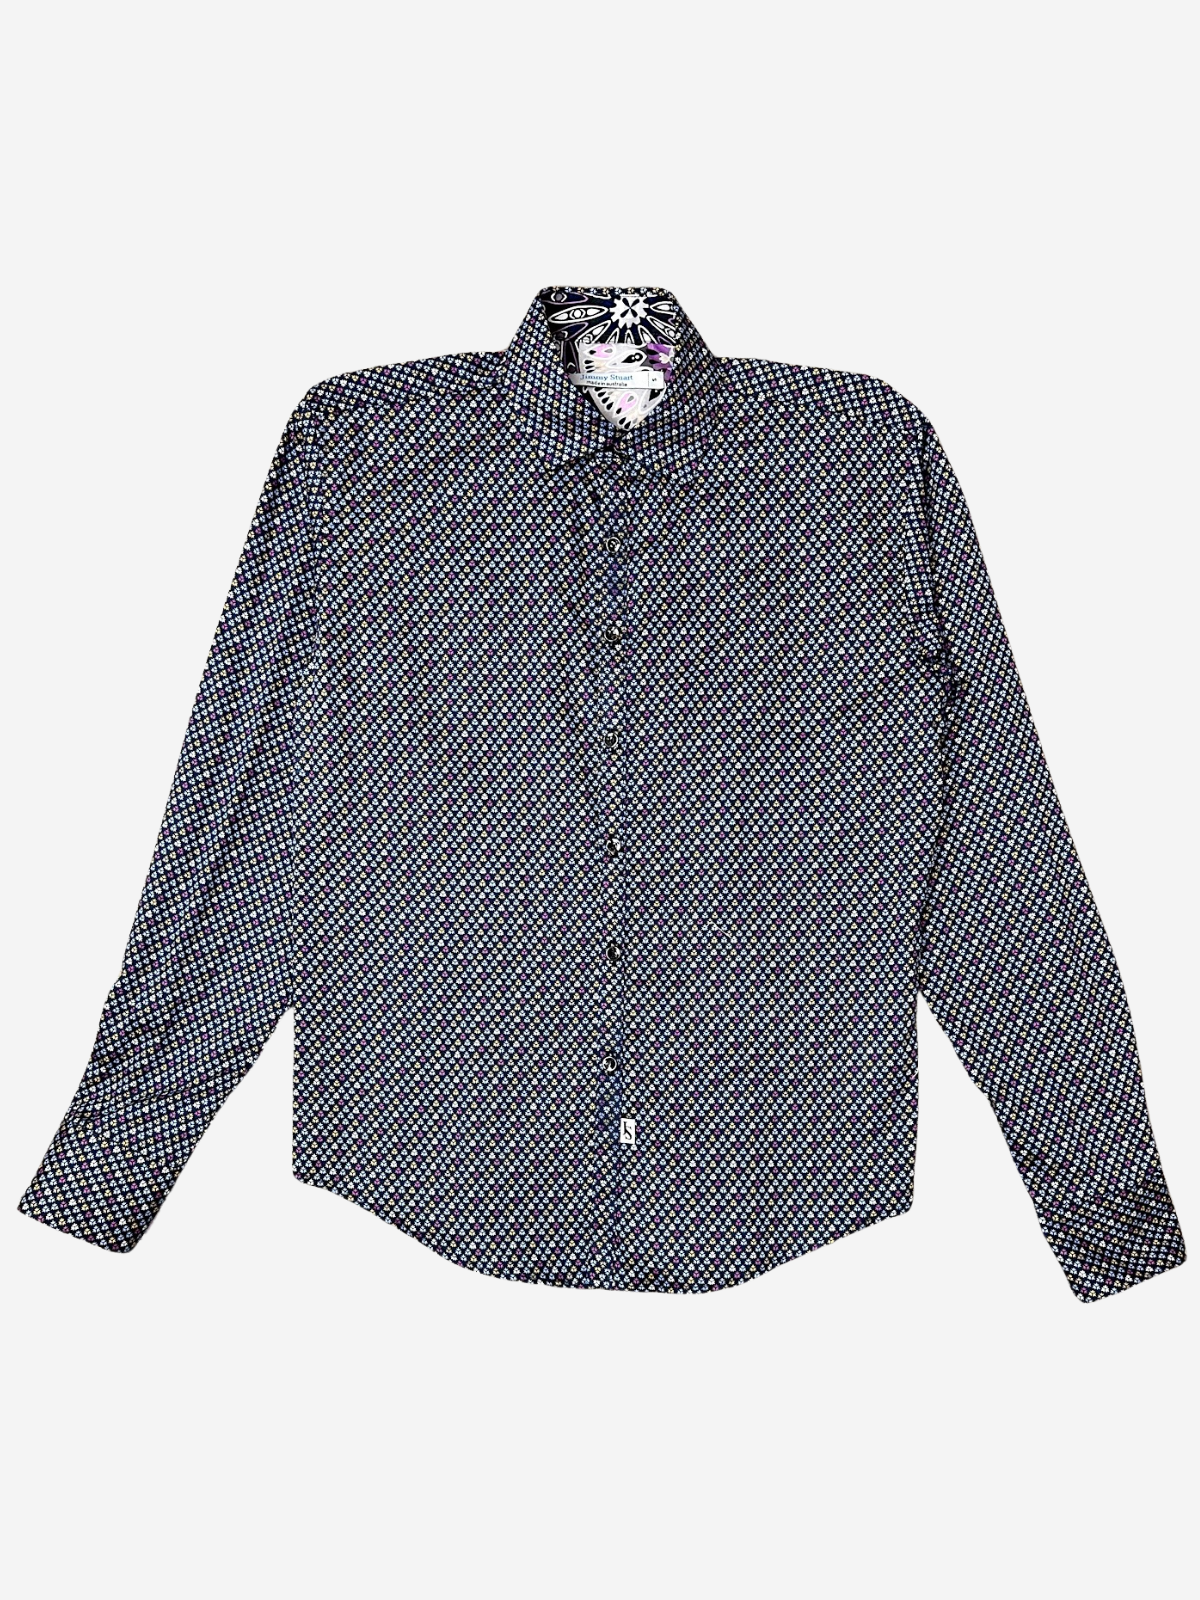 Flake Abstract Cotton L/S Shirt - Blue